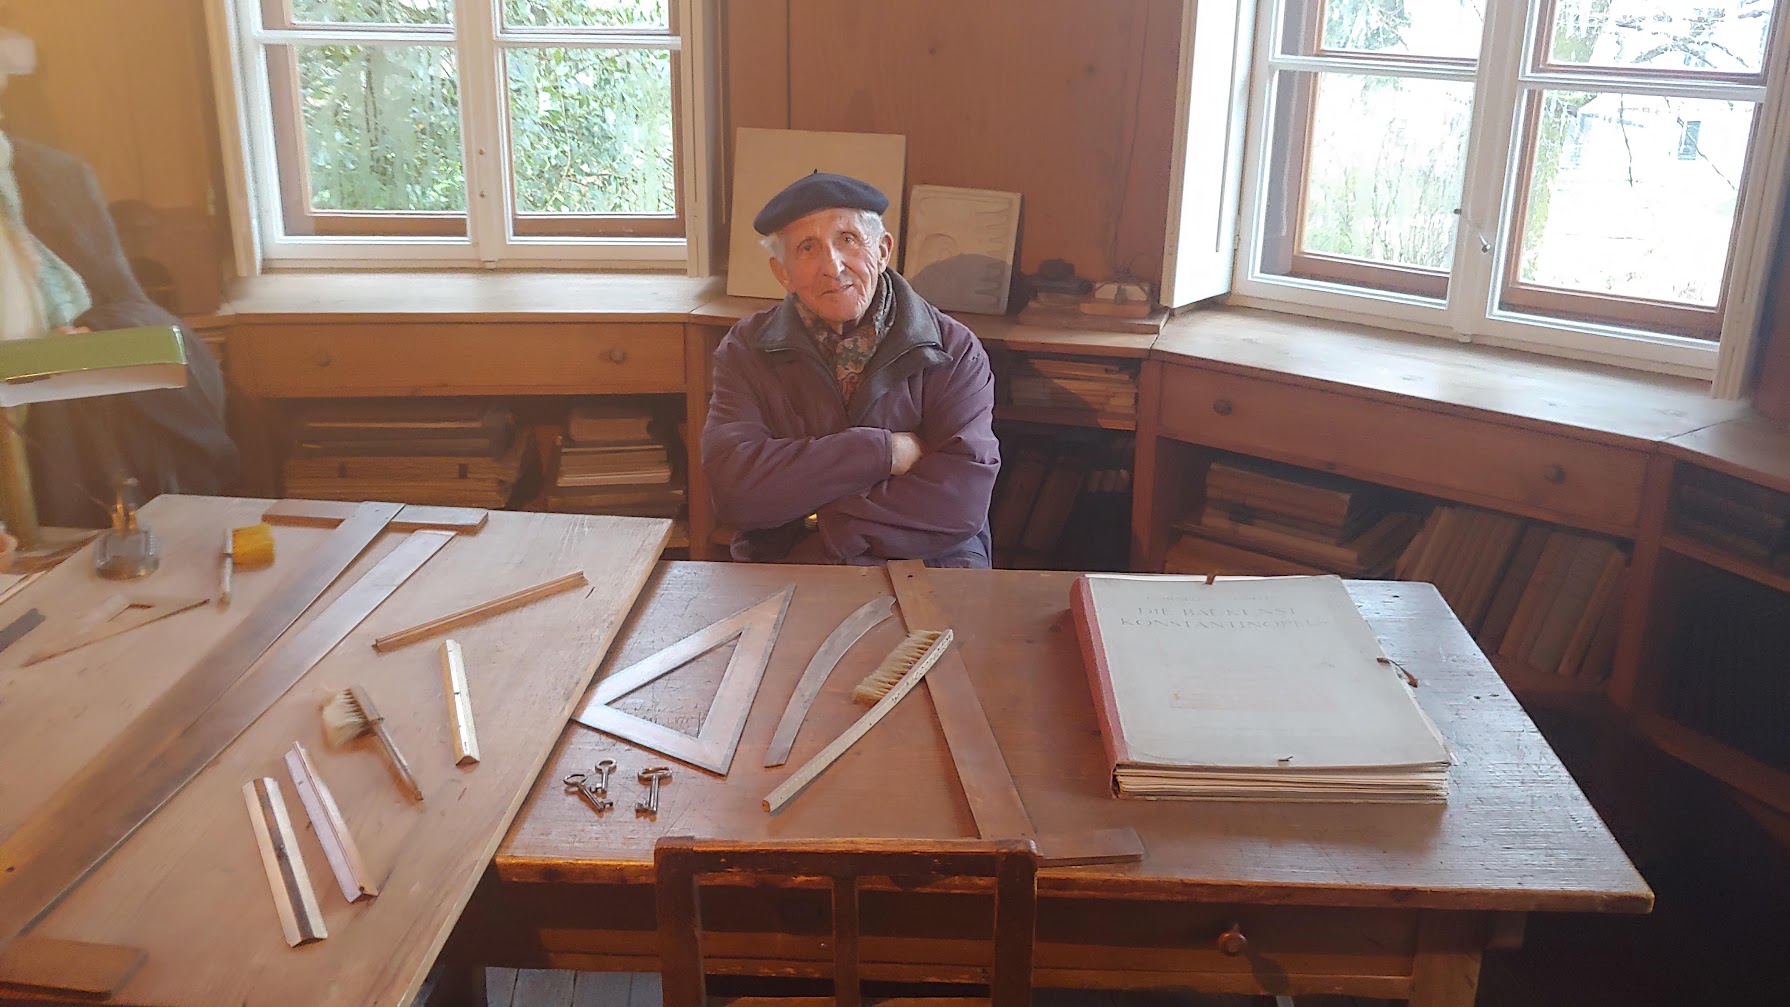 Architect Andrej Lodrant sat in his chair in Plečnik’s drawing room during his visit to the Plečnik House